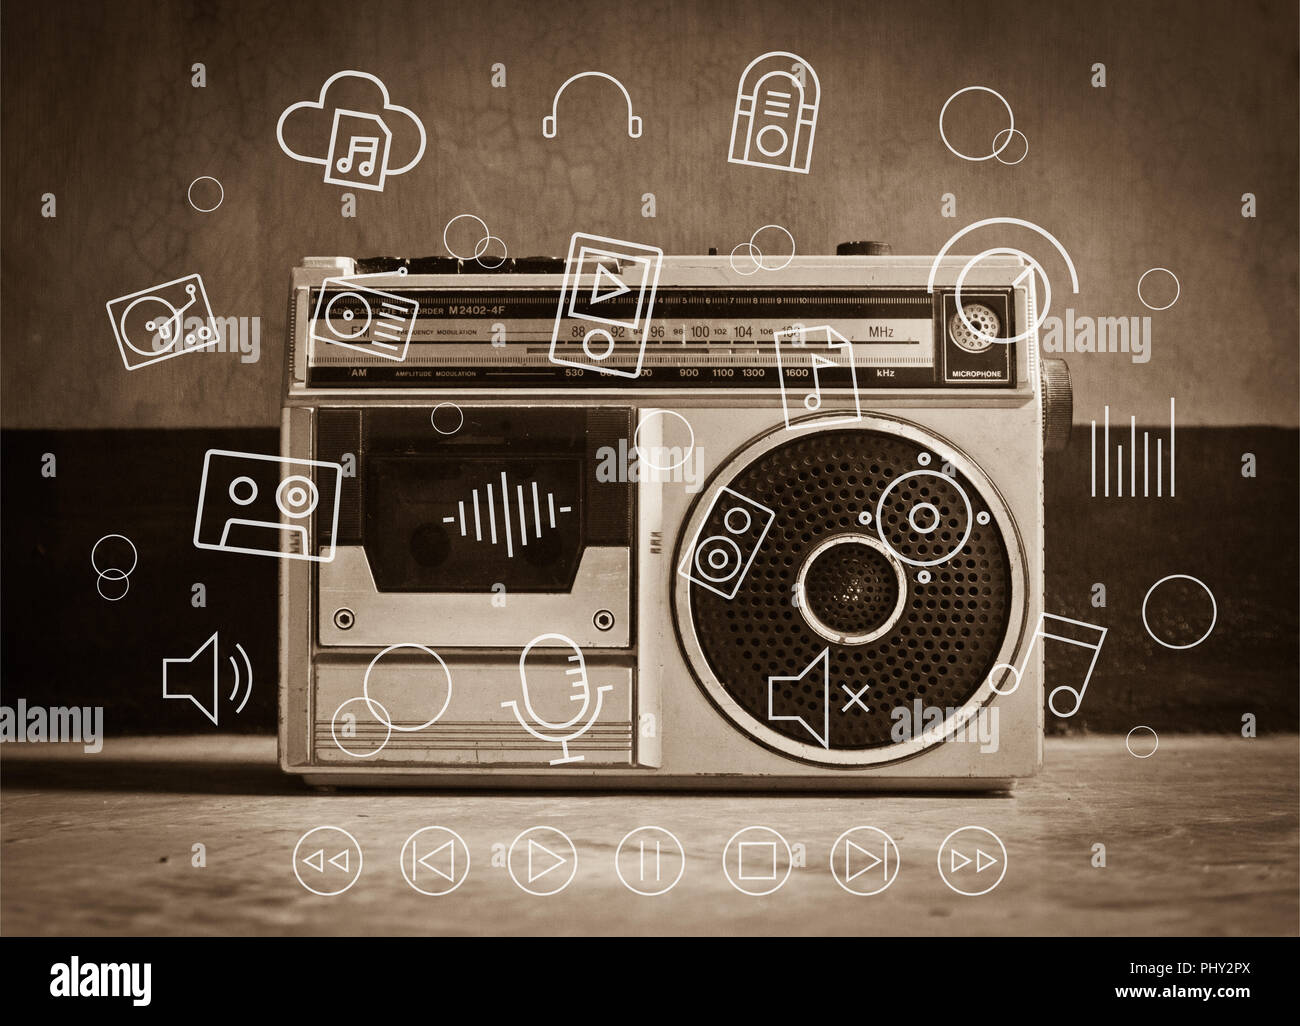 Old vintage Radio with music icons, music infographic Stock Photo - Alamy